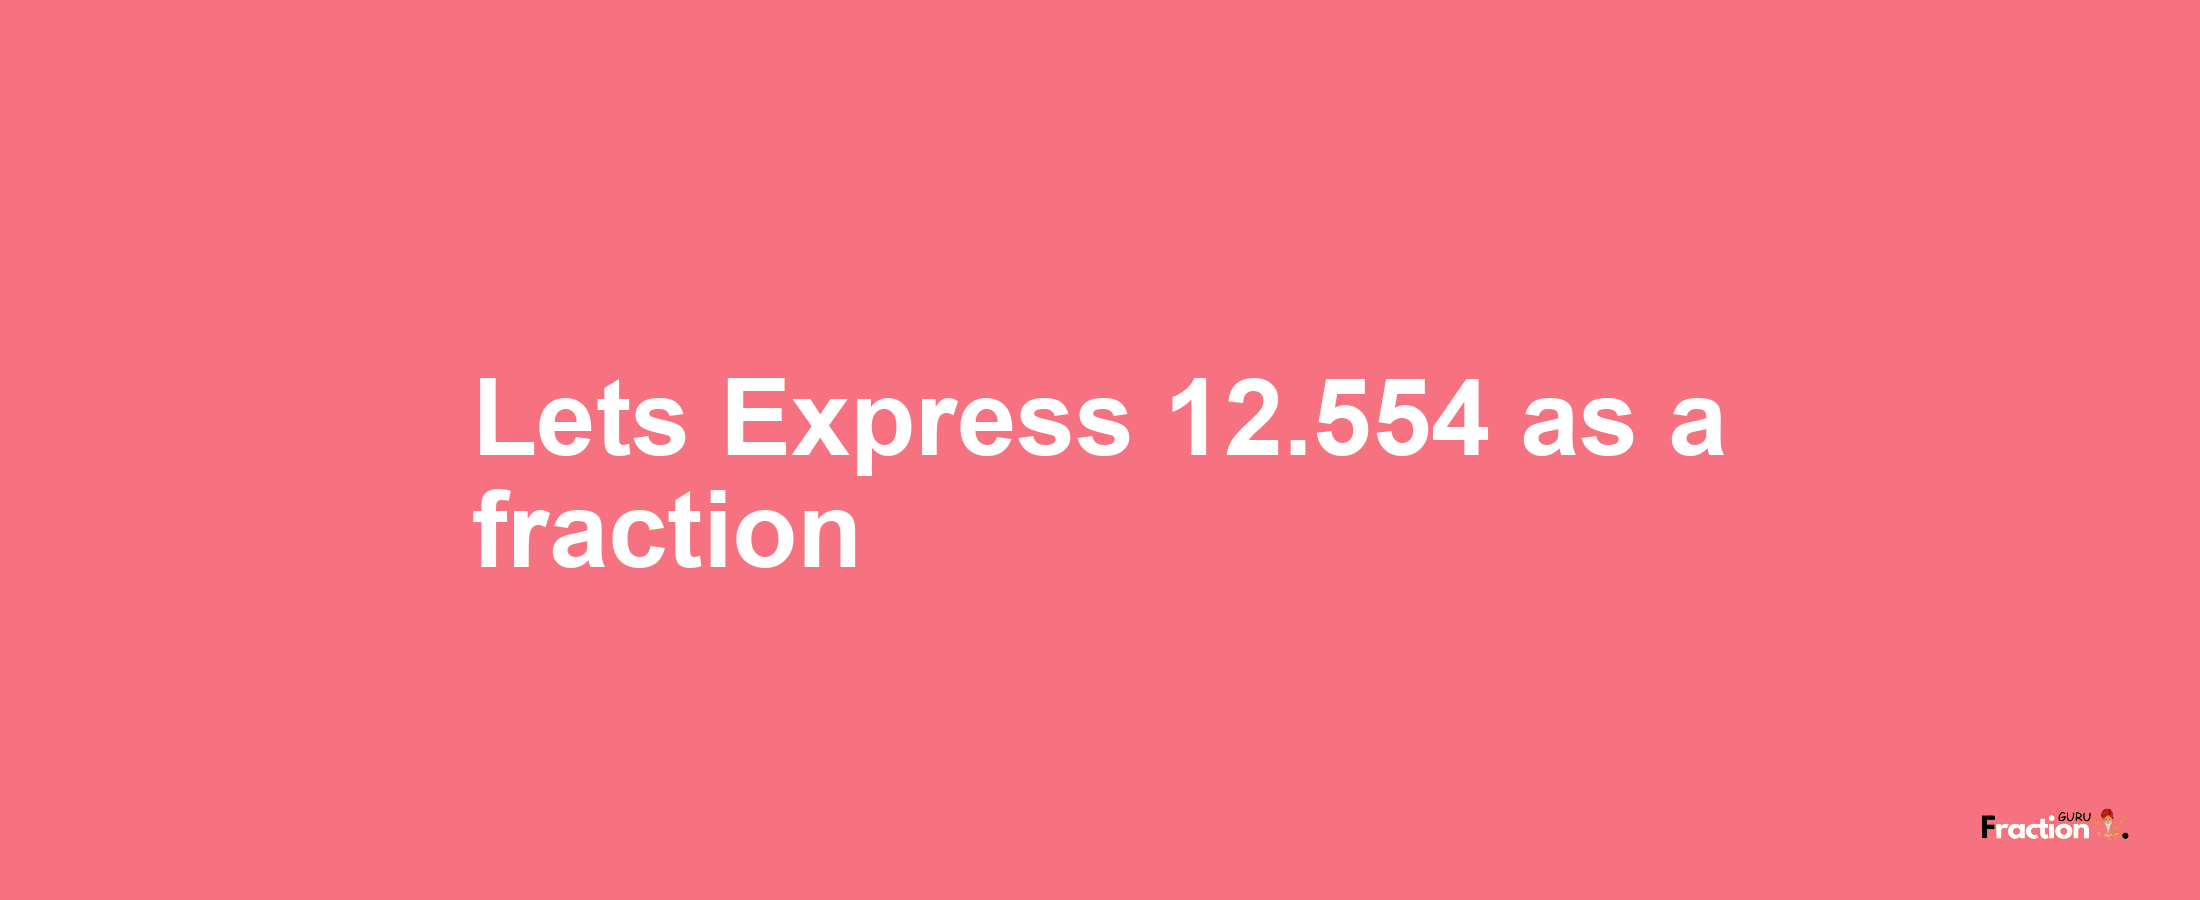 Lets Express 12.554 as afraction